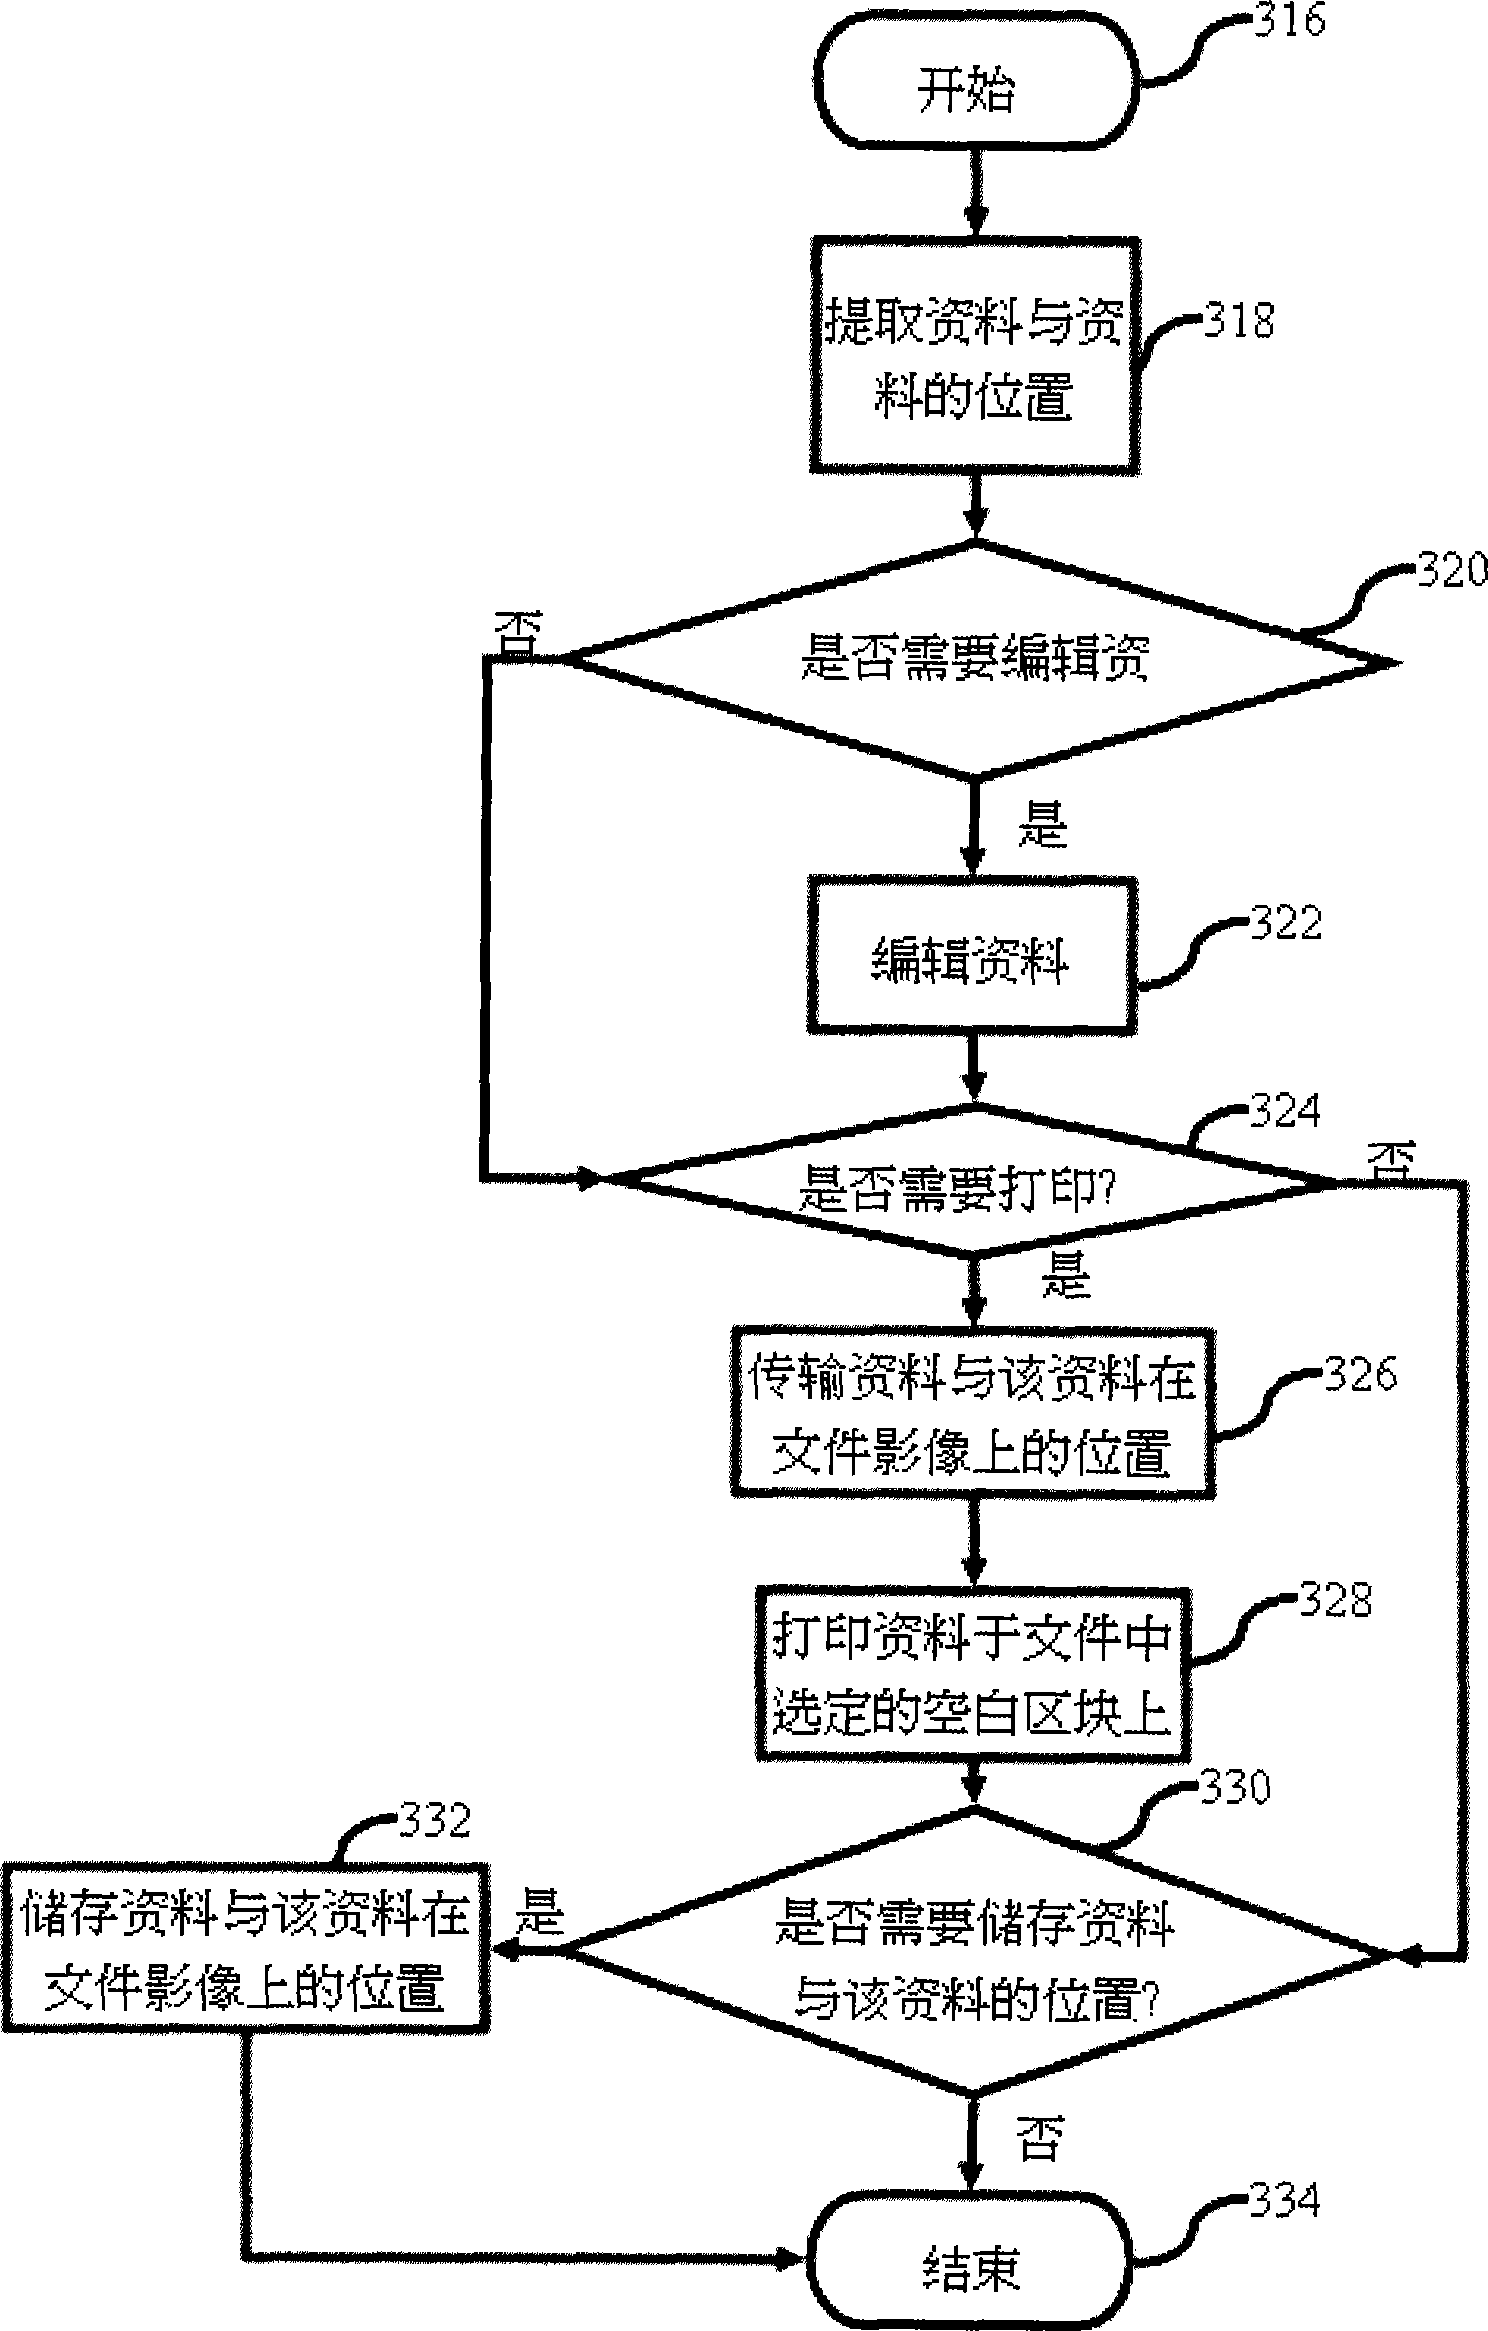 Method and device for combining data with files